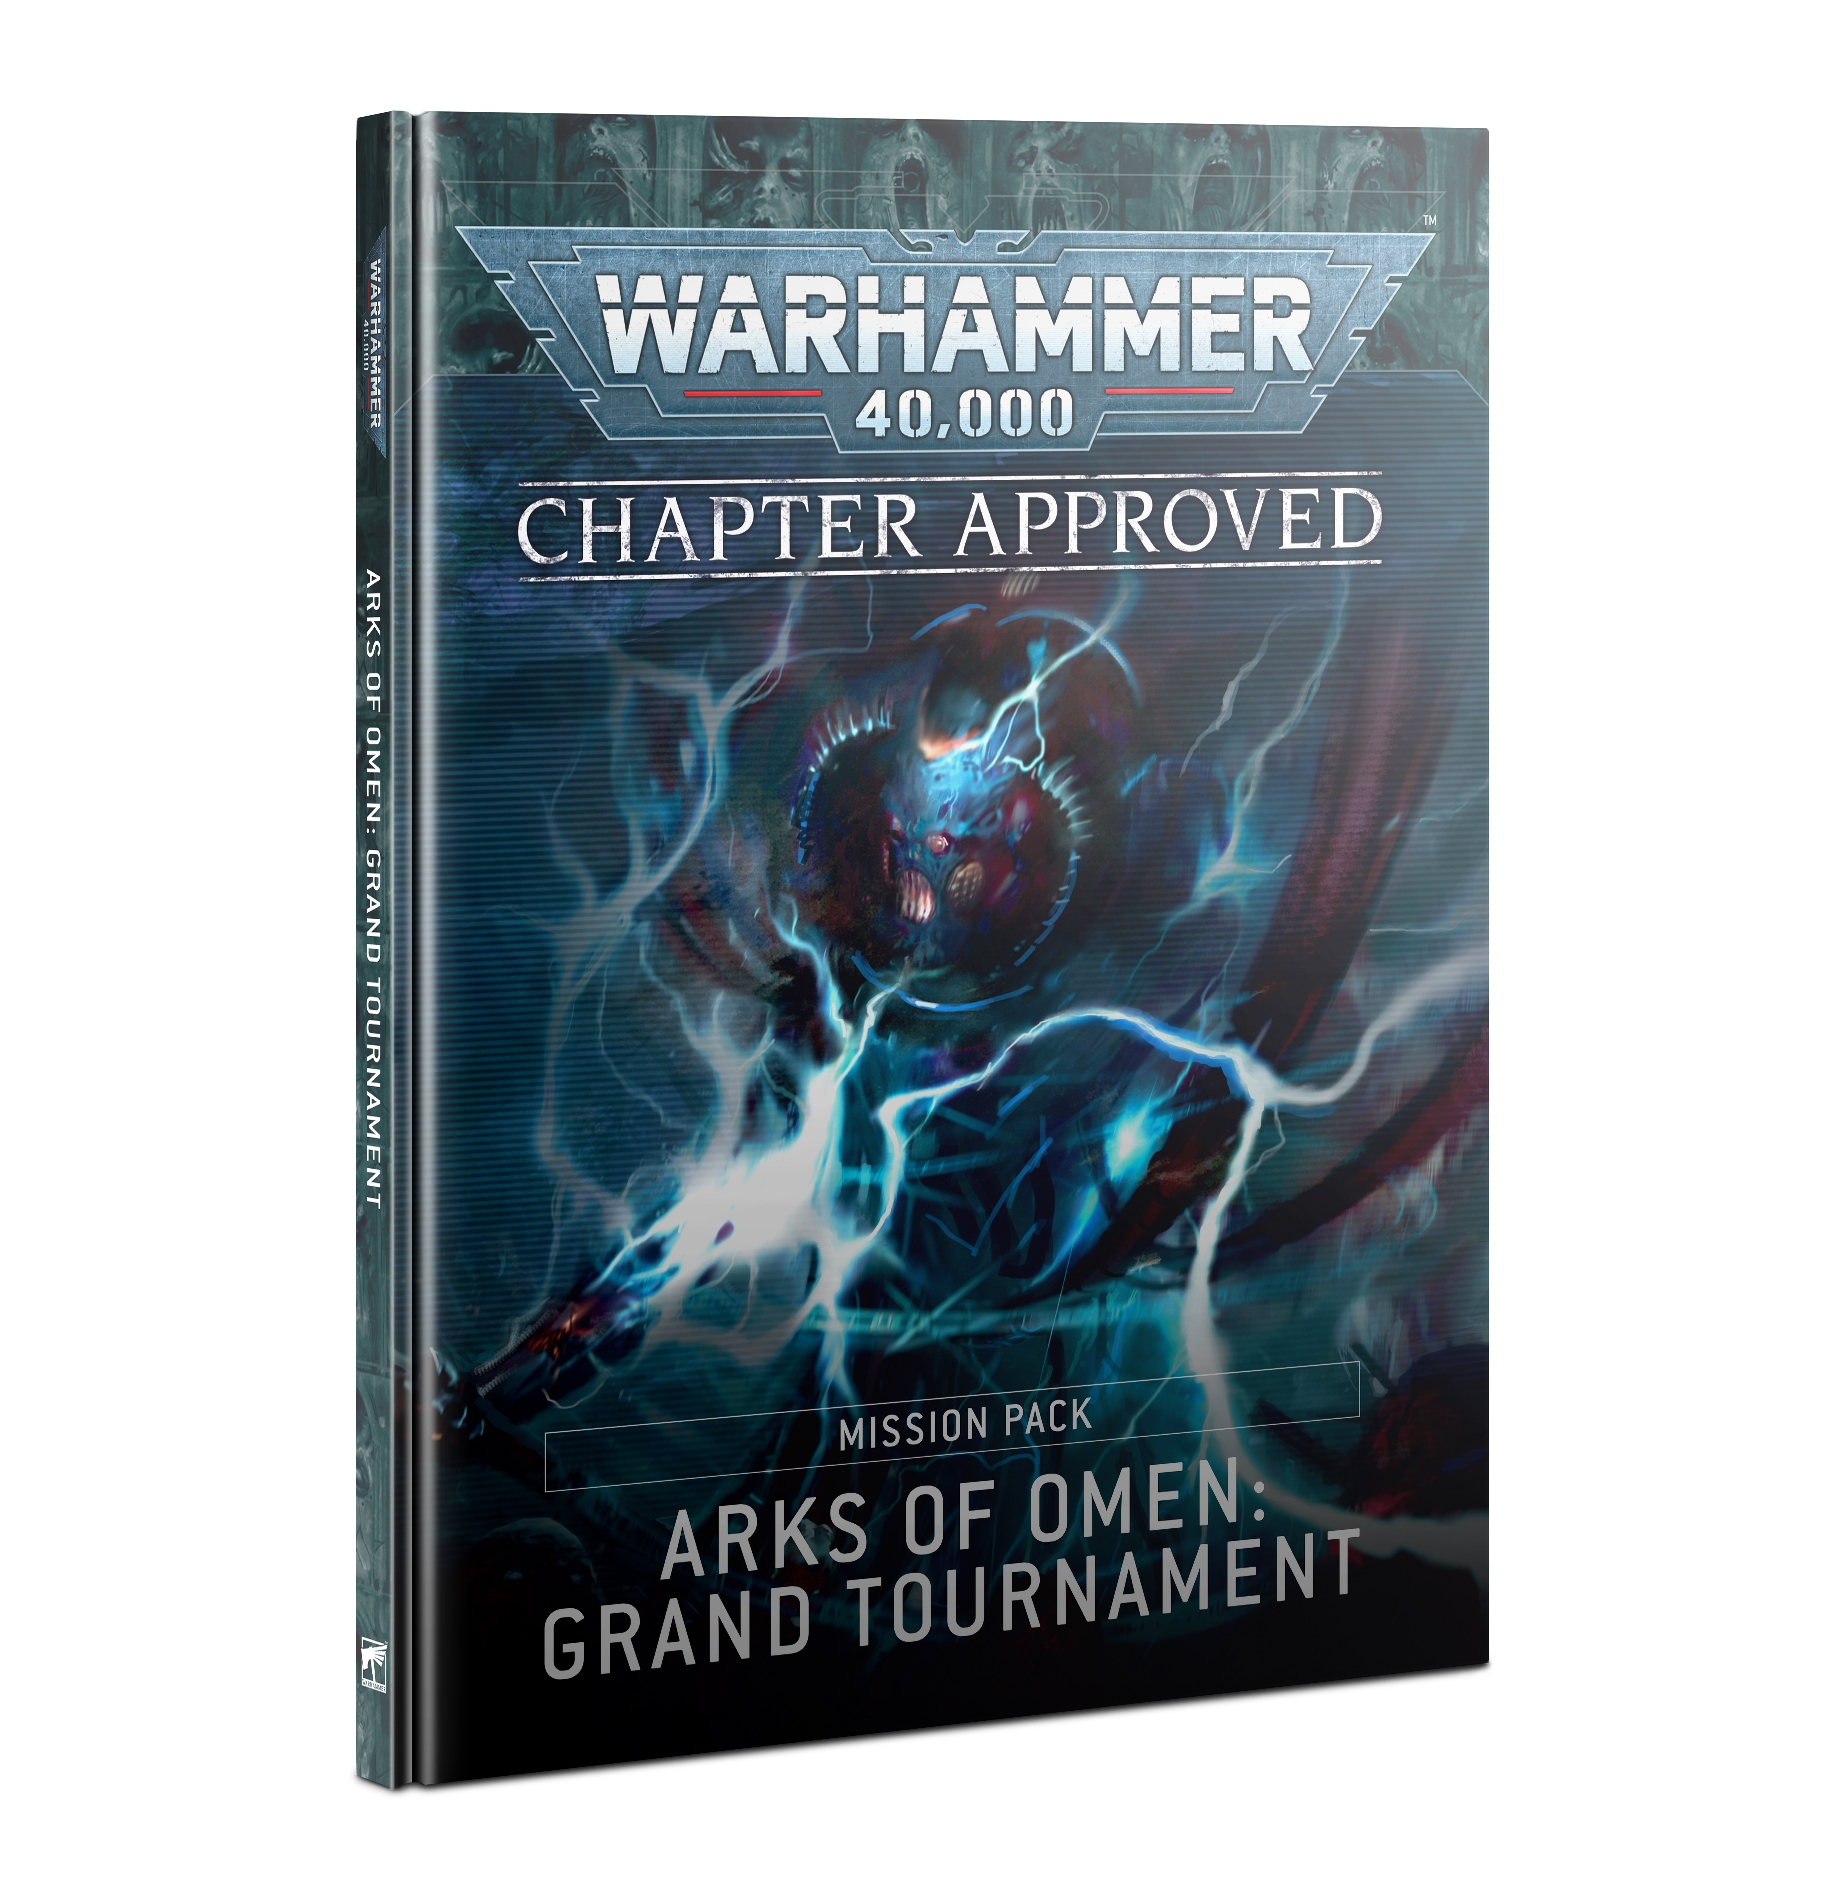 warhammer-40000-mission-pack-points-book-23-grand-tournament-arks-of-omen-1